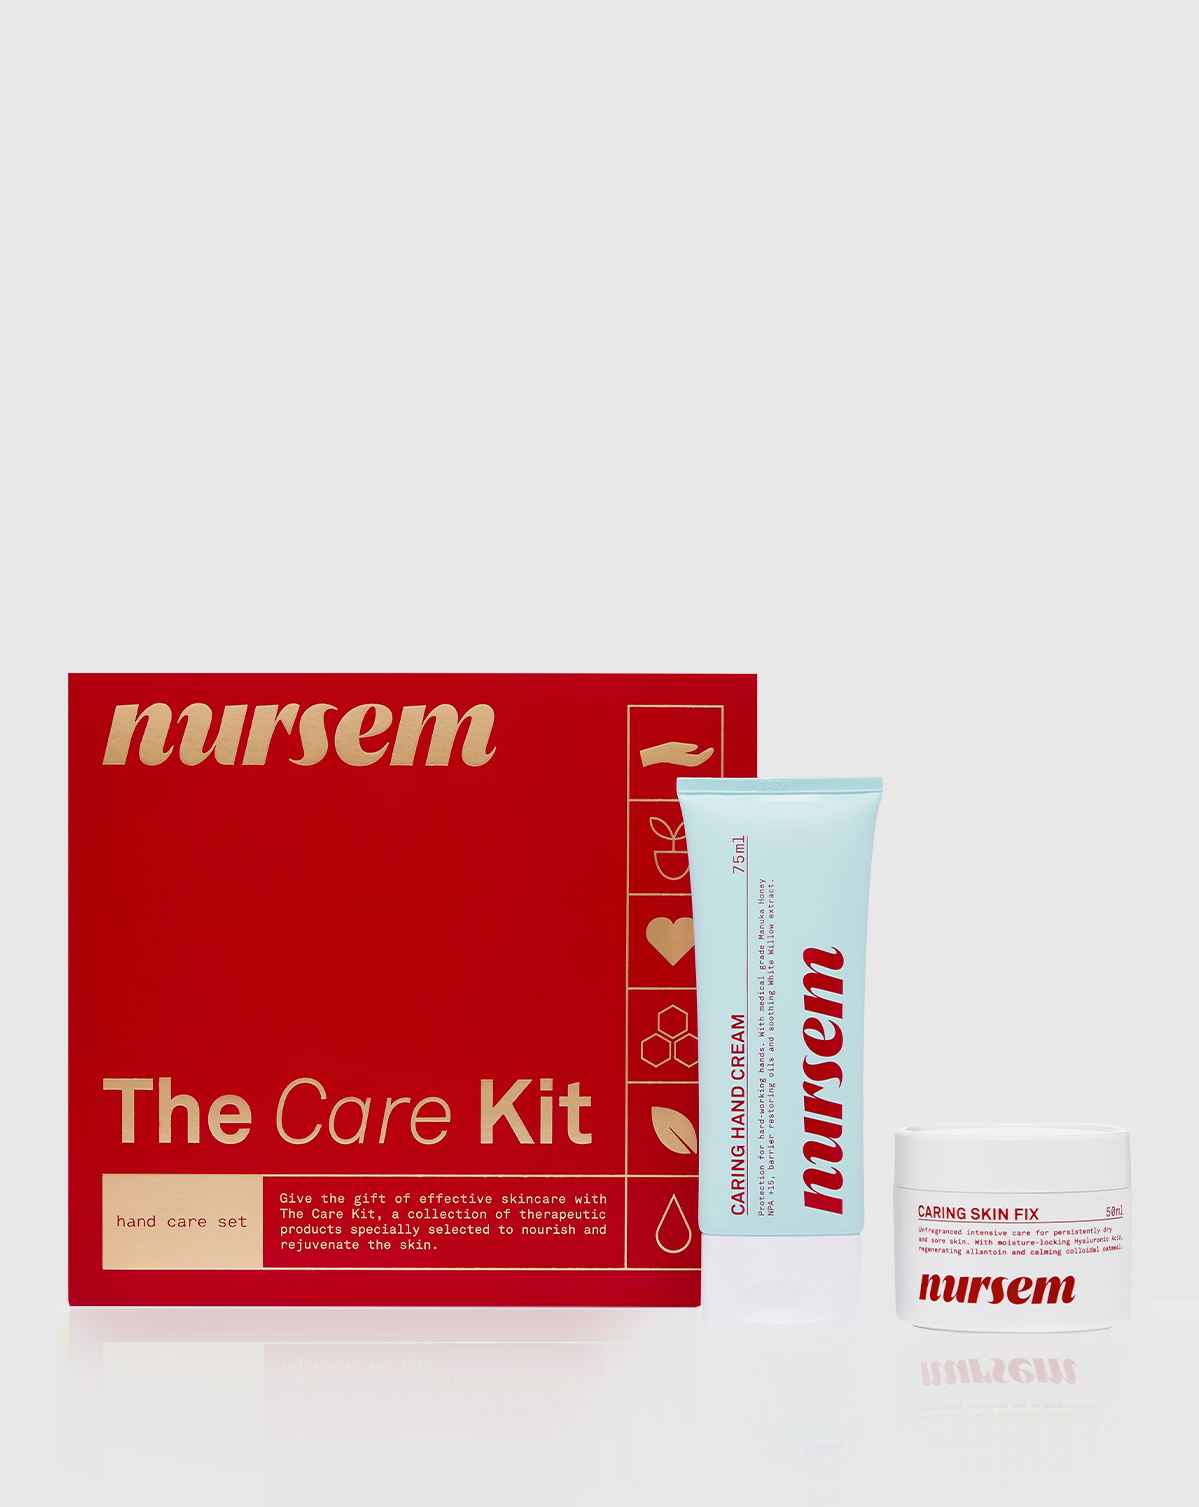 THE HAND CARE KIT